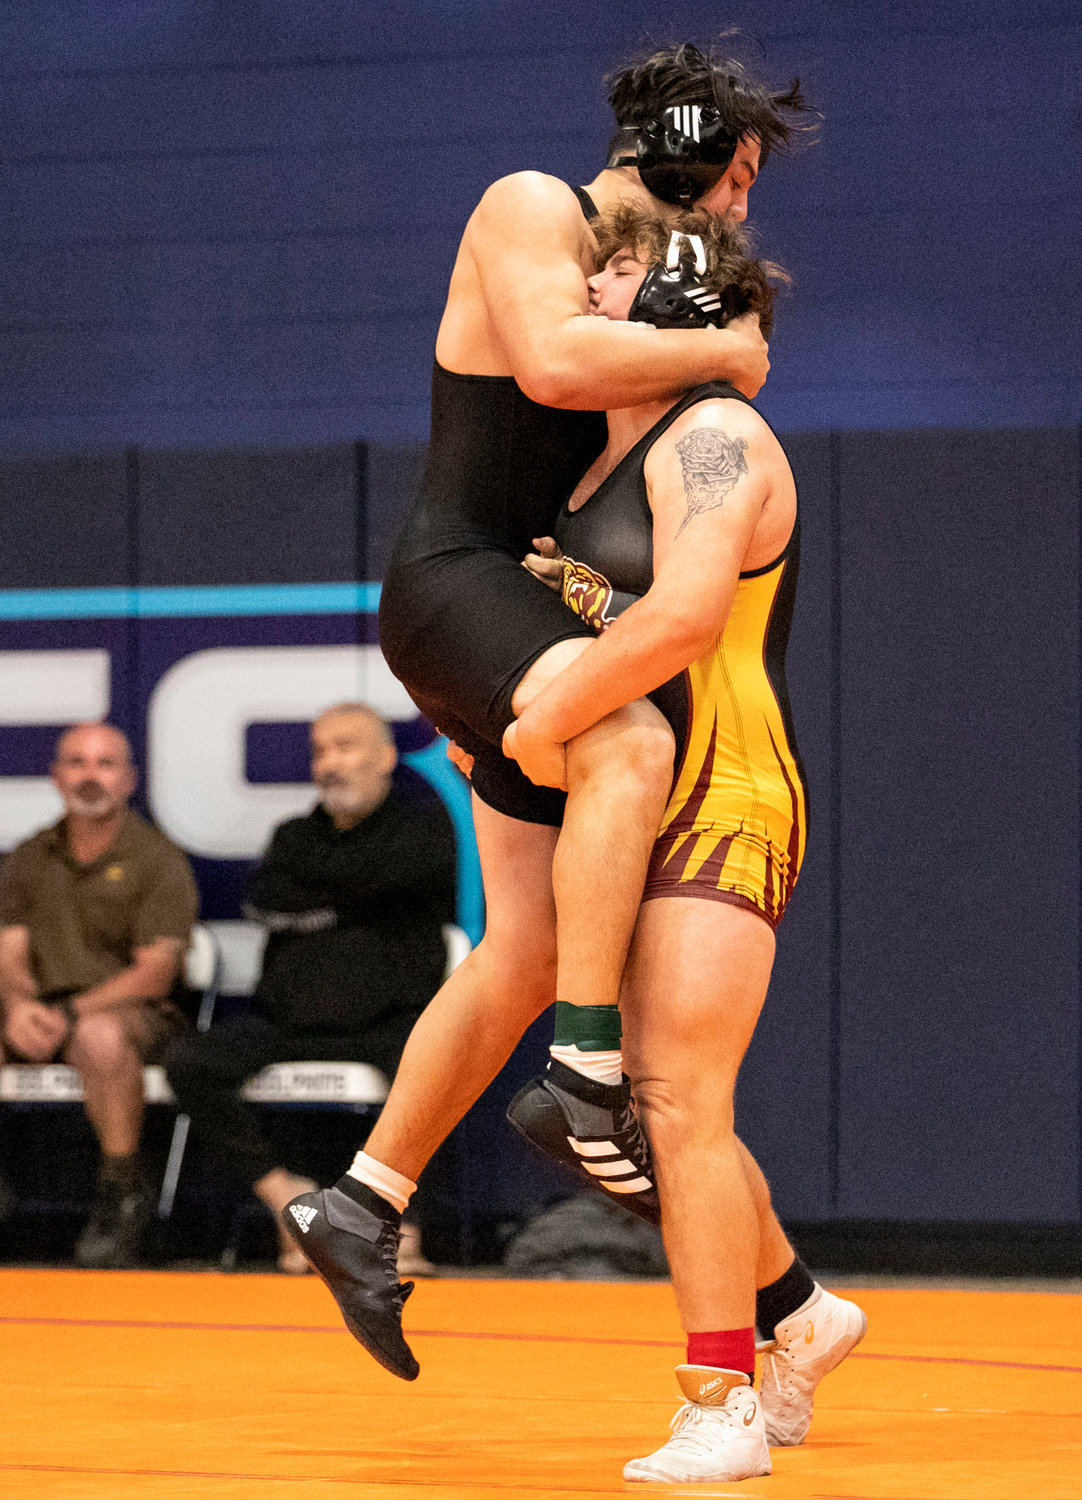 Caiden Arnold of Robertsdale lifts Elberta’s Eden Overstreet in the 220-pound quarterfinal match of the Baldwin County Championship meet Friday, Jan. 6, at Gulf Shores High School. Arnold finished second in the class to earn one of three all-county honors for the Golden Bears.